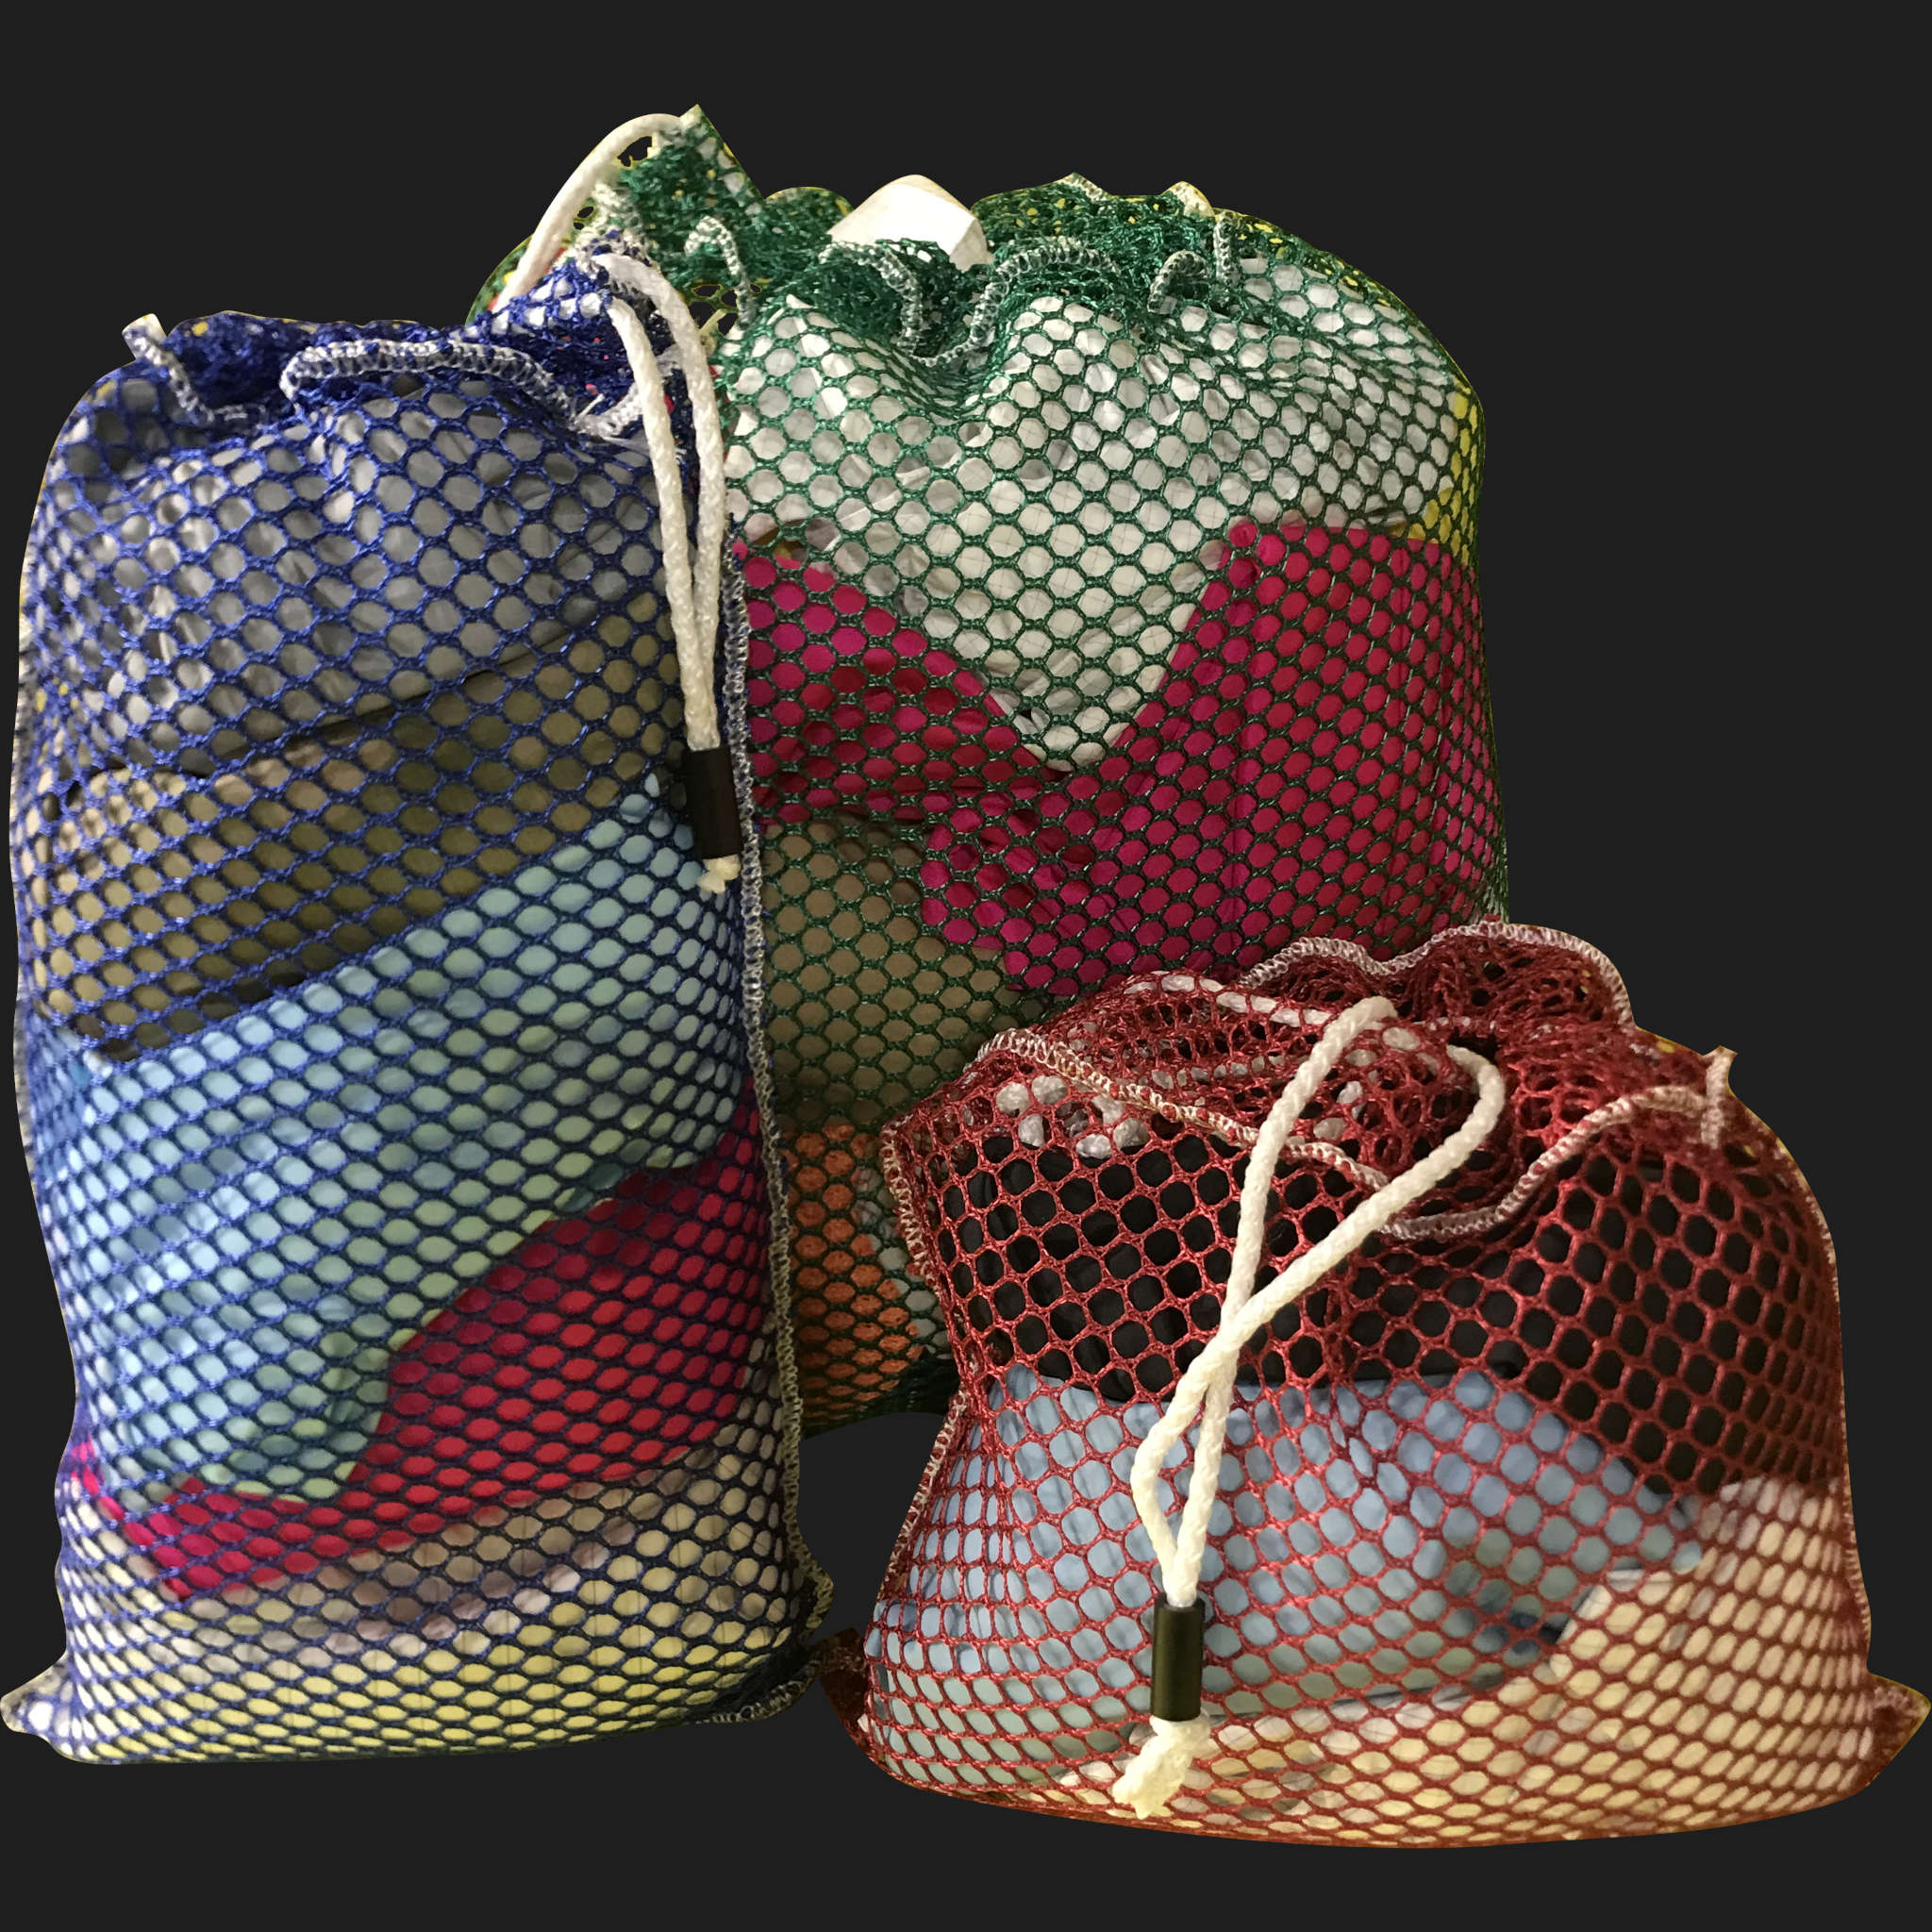 14" x 18" Customized Mesh-Net-Laundry Bags Heavy Duty with Cord and barrellock closure